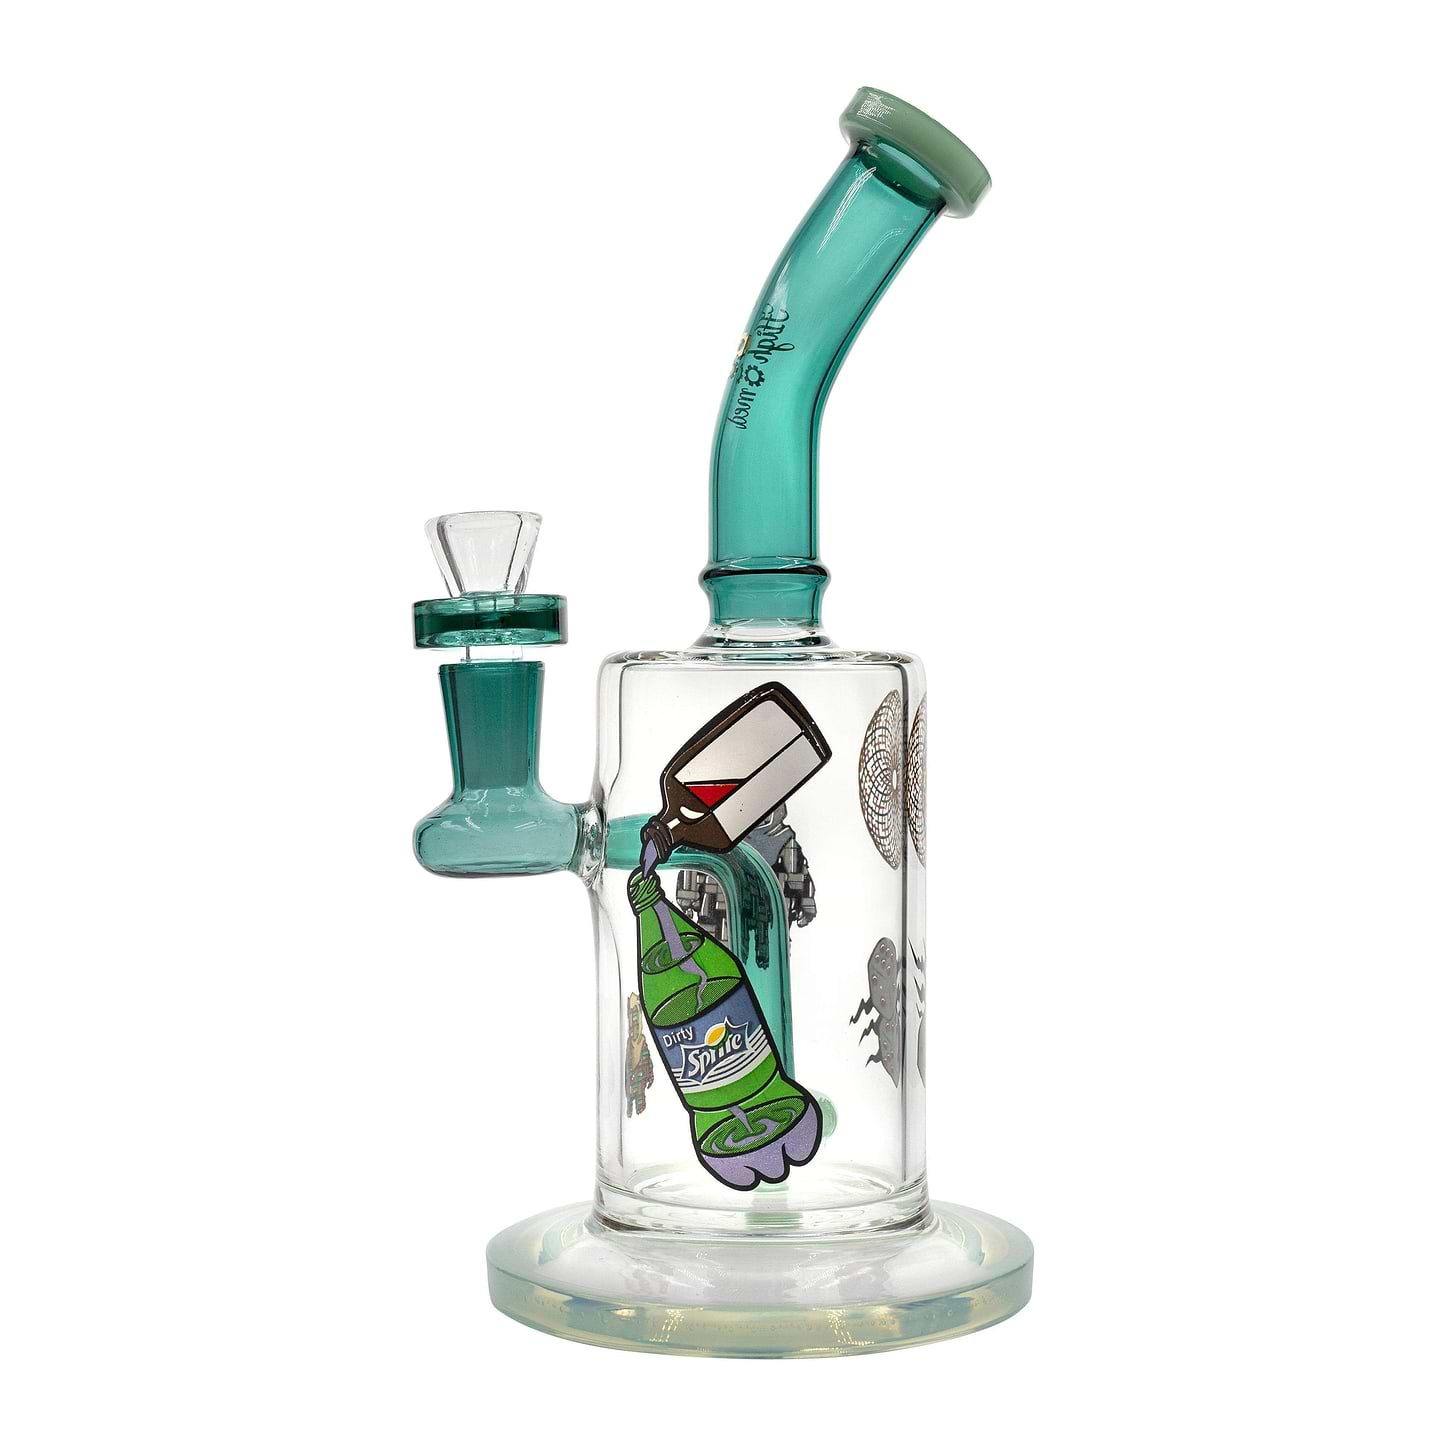 9-inch glass bong smoking device built in splashguard with a Grizzly Bong graffiti style design